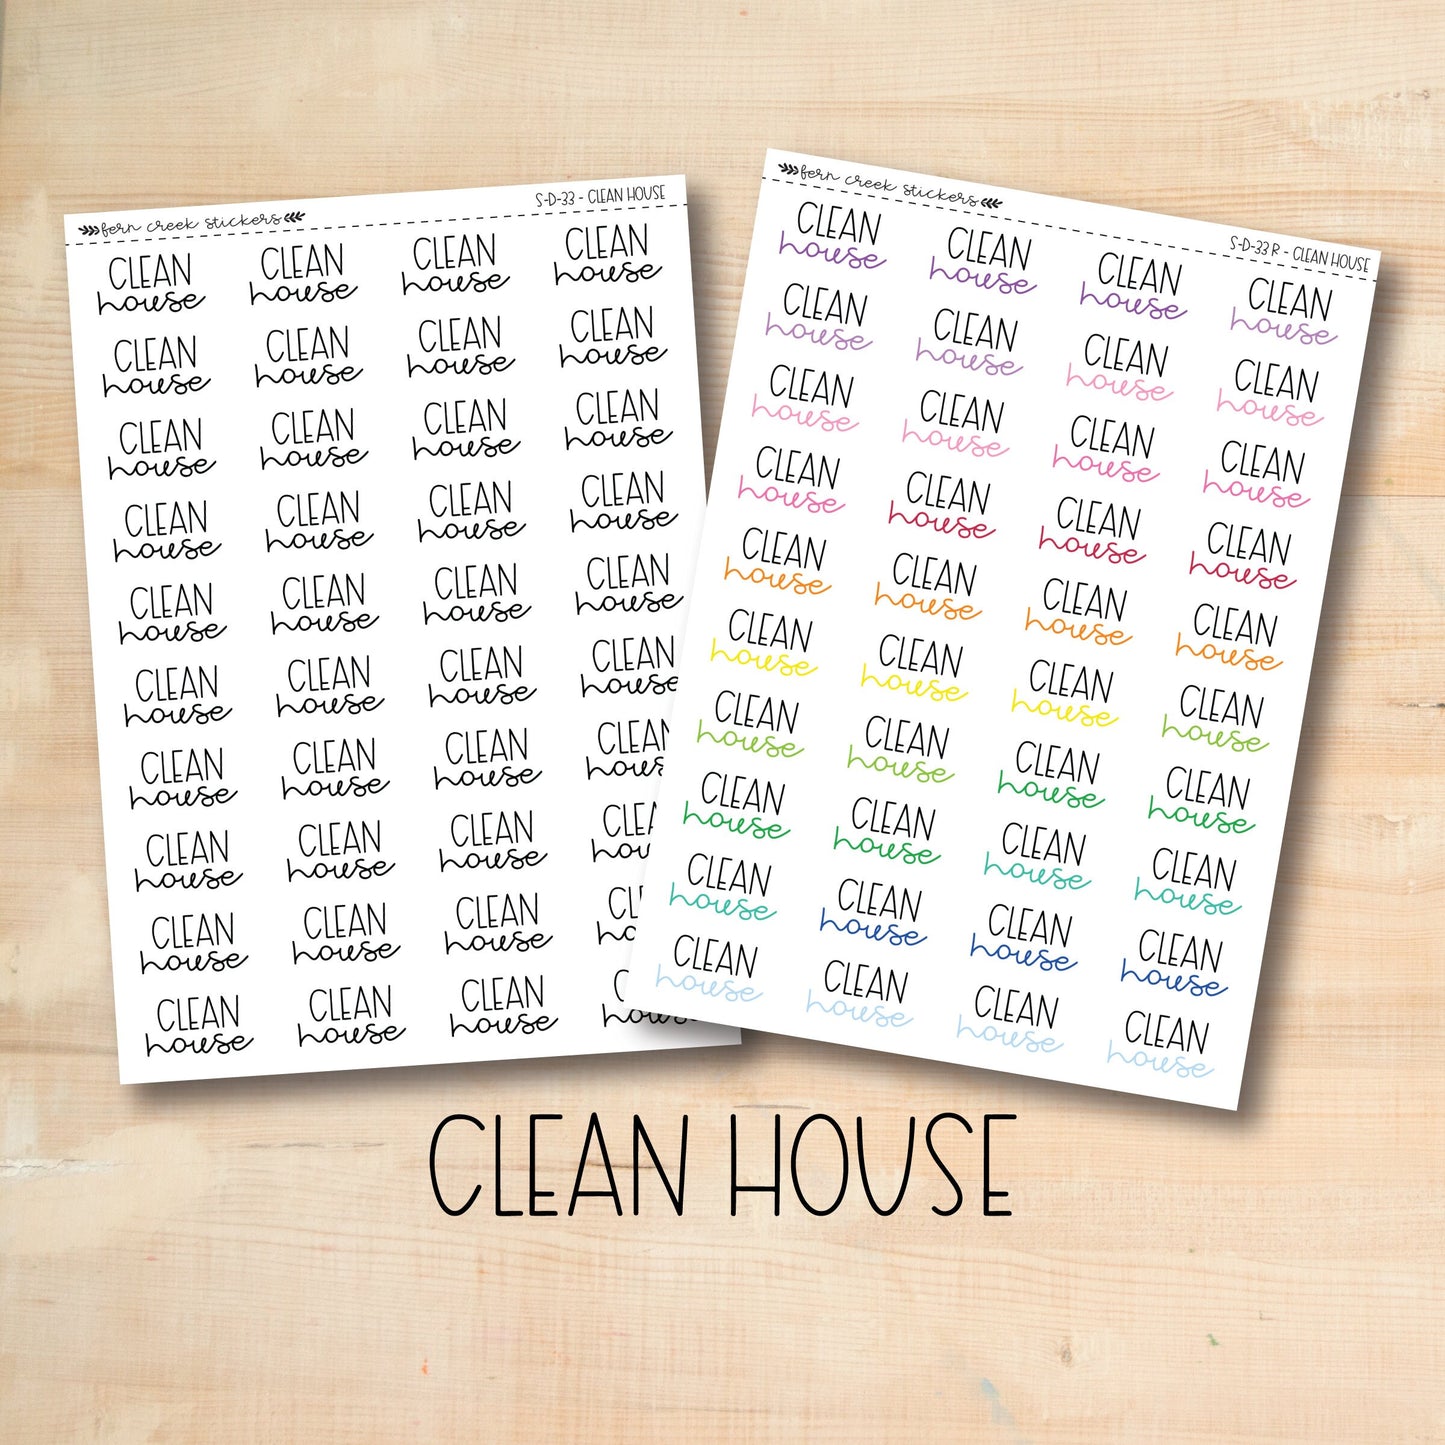 two clean house stickers on a wooden surface